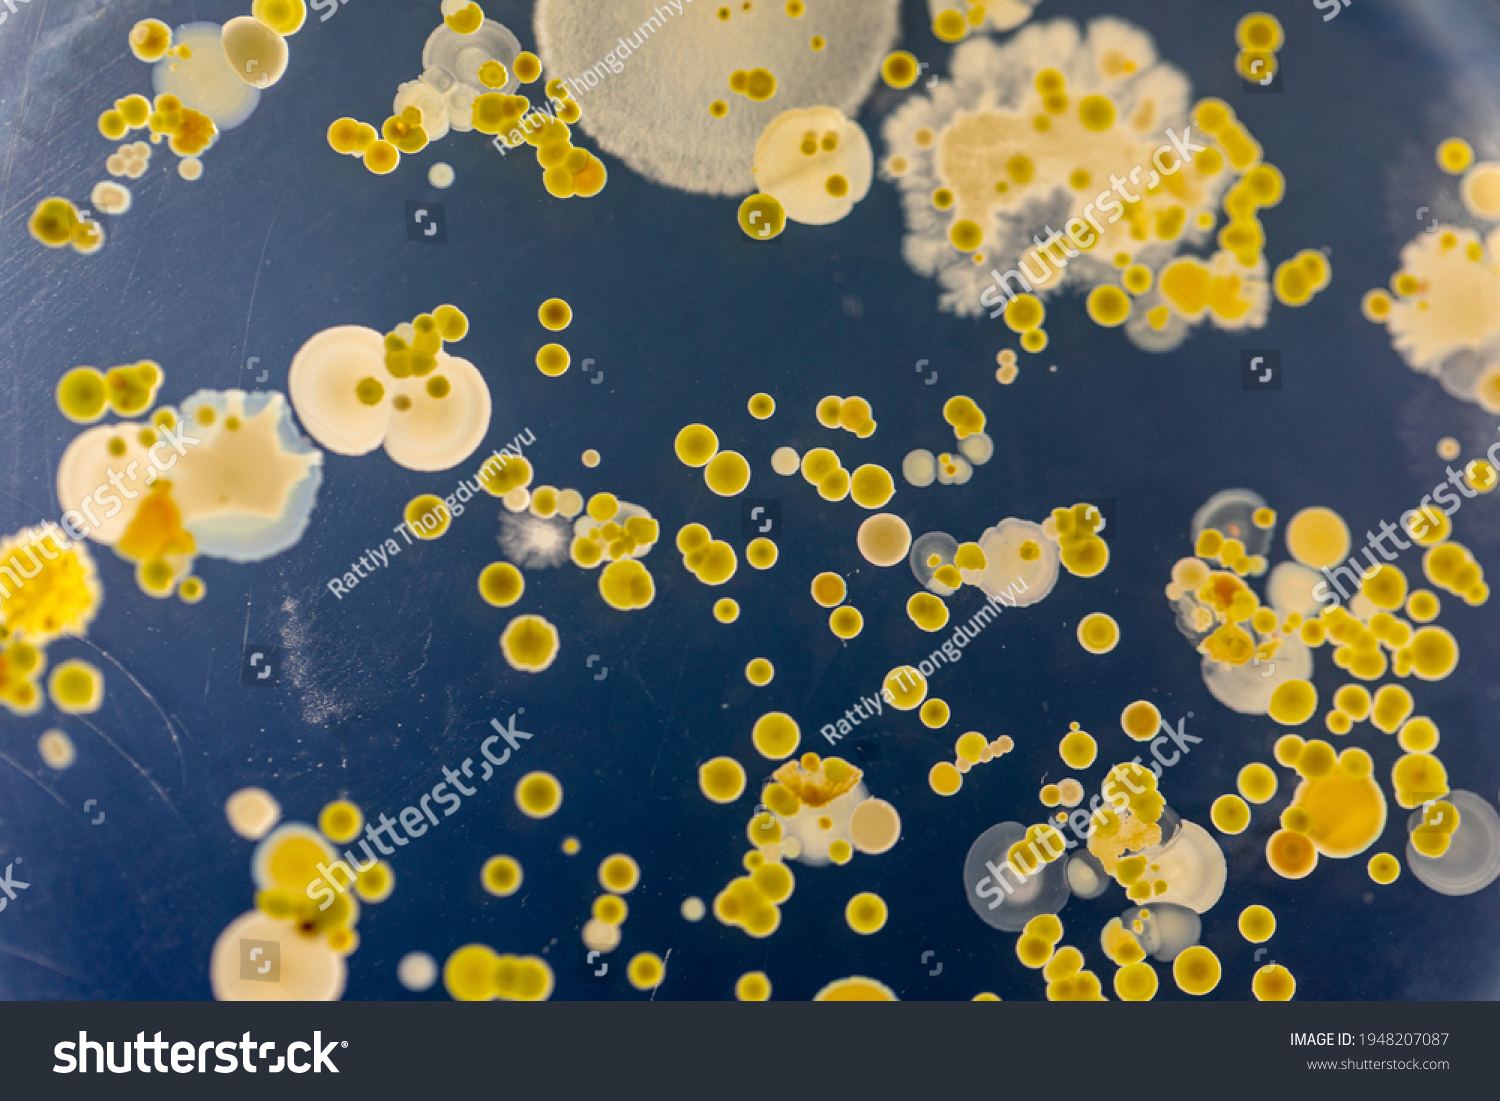 Backgrounds of Characteristics and Different shaped Colony of Bacteria and Mold growing on agar plates from Soil samples for education in Microbiology laboratory.
 #1948207087